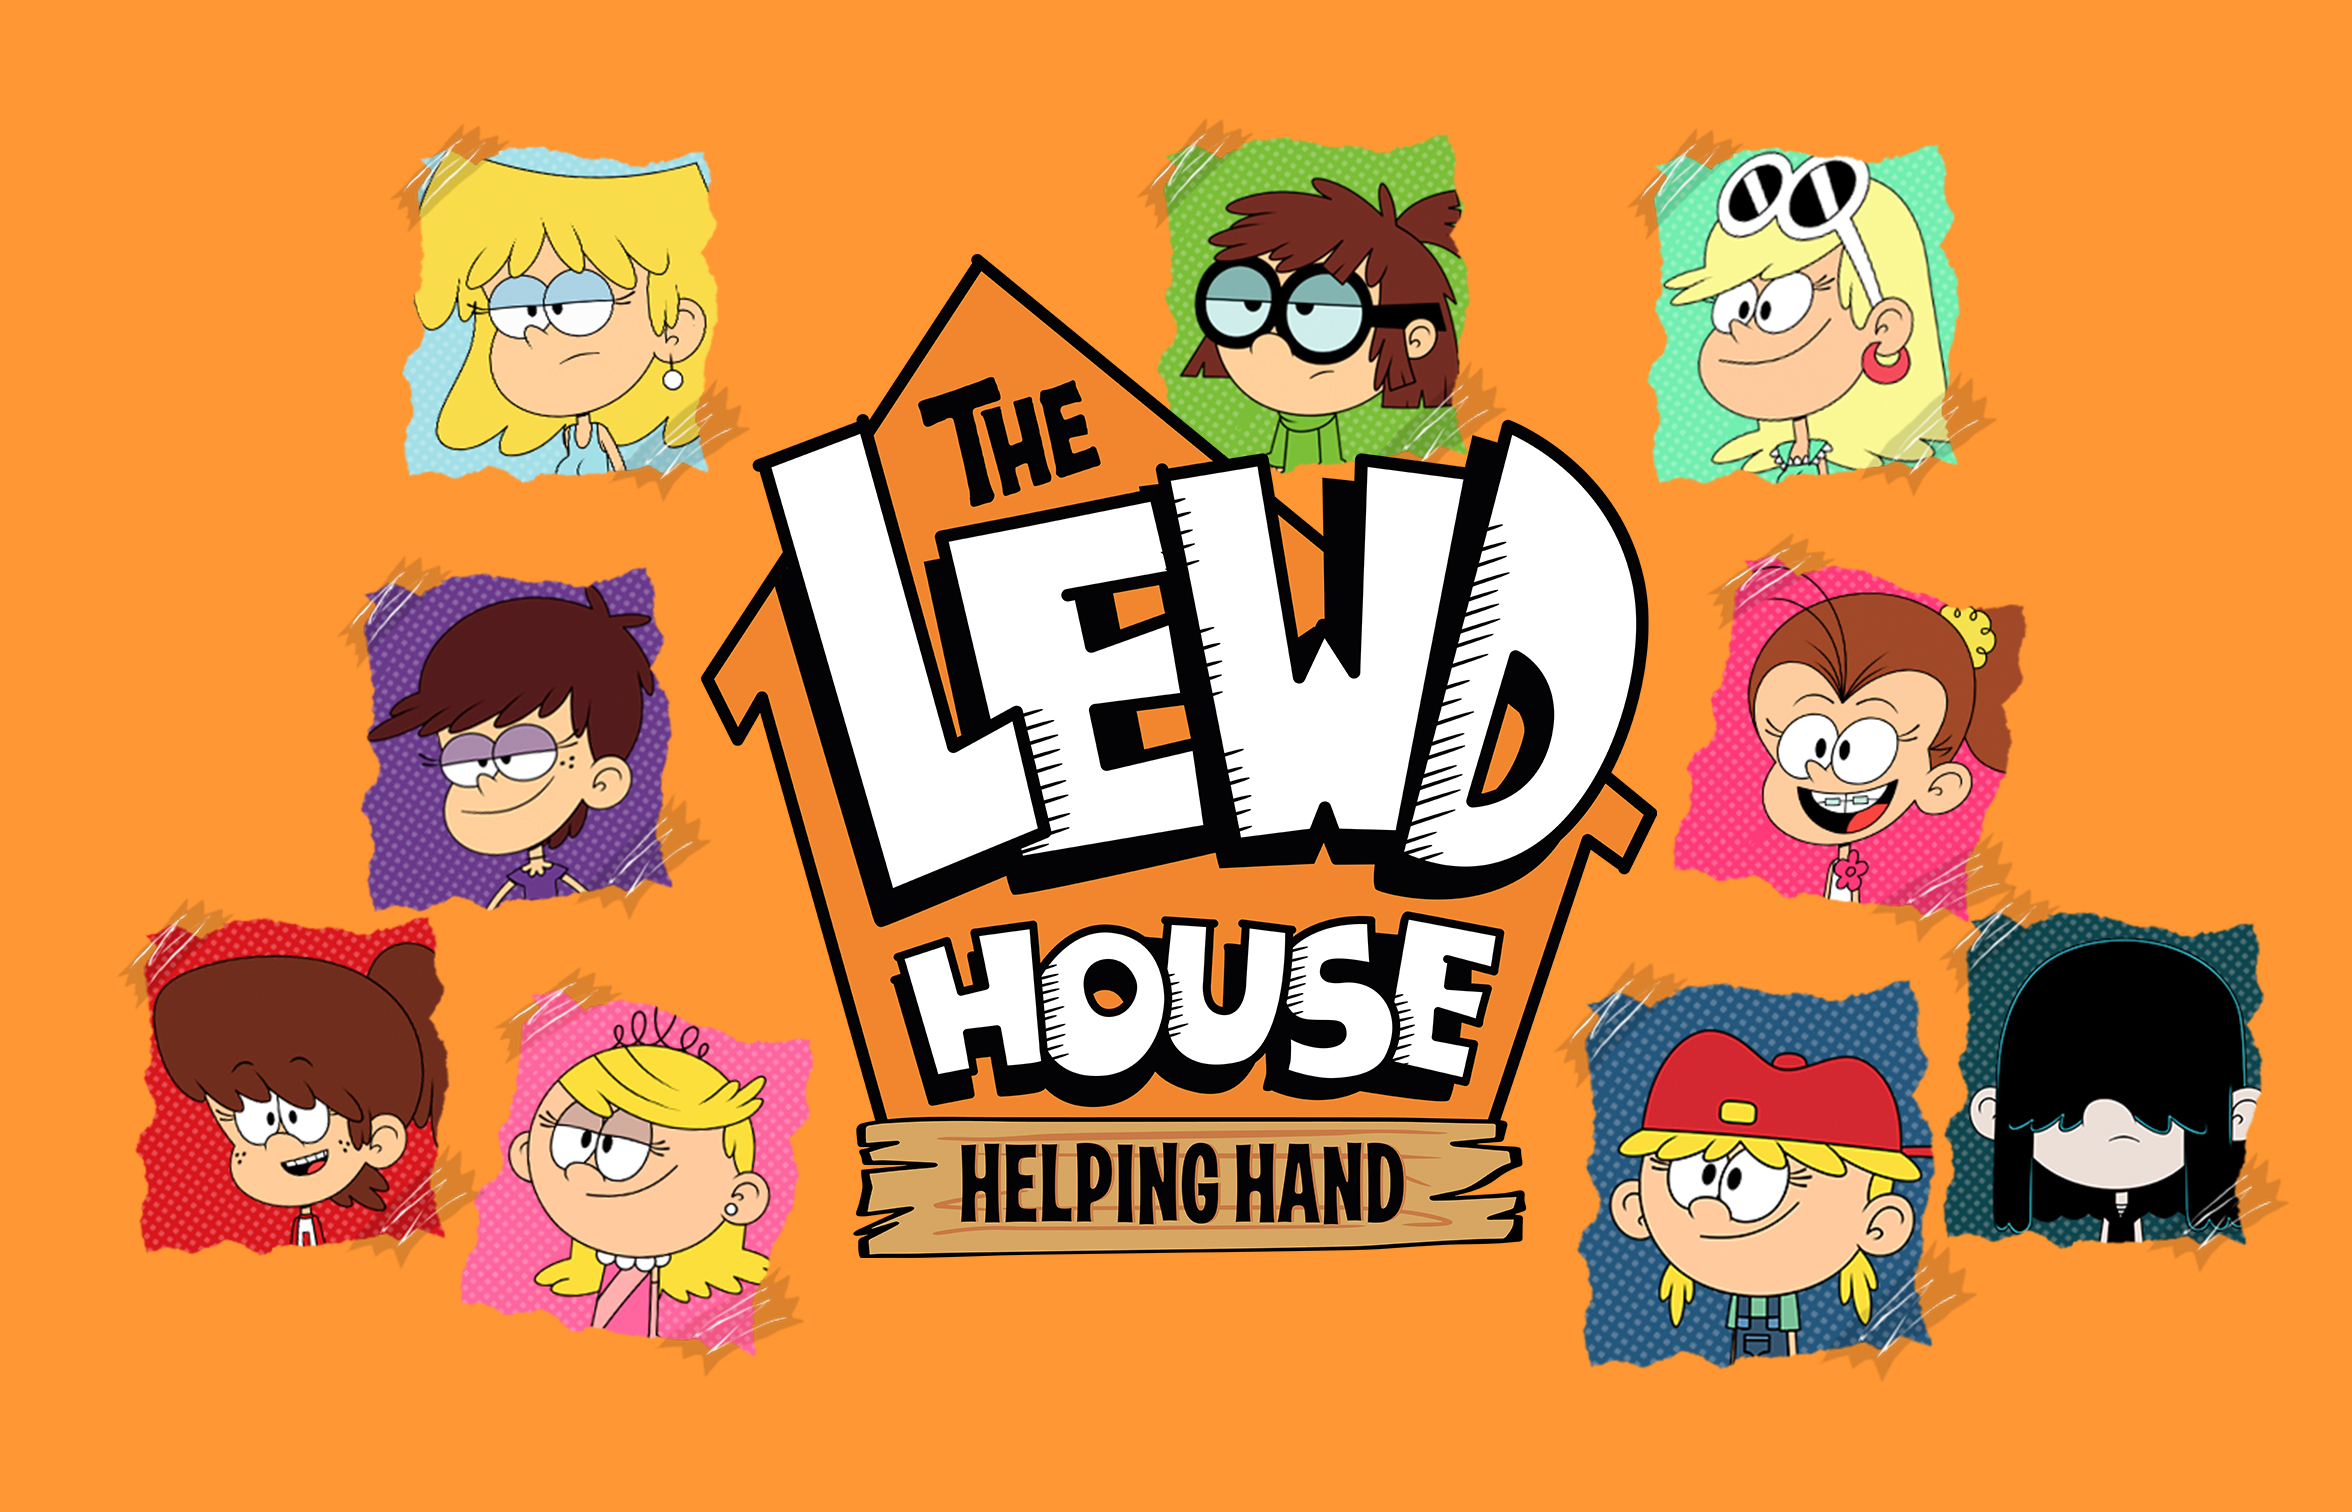 The lewd house: helping hand porn game